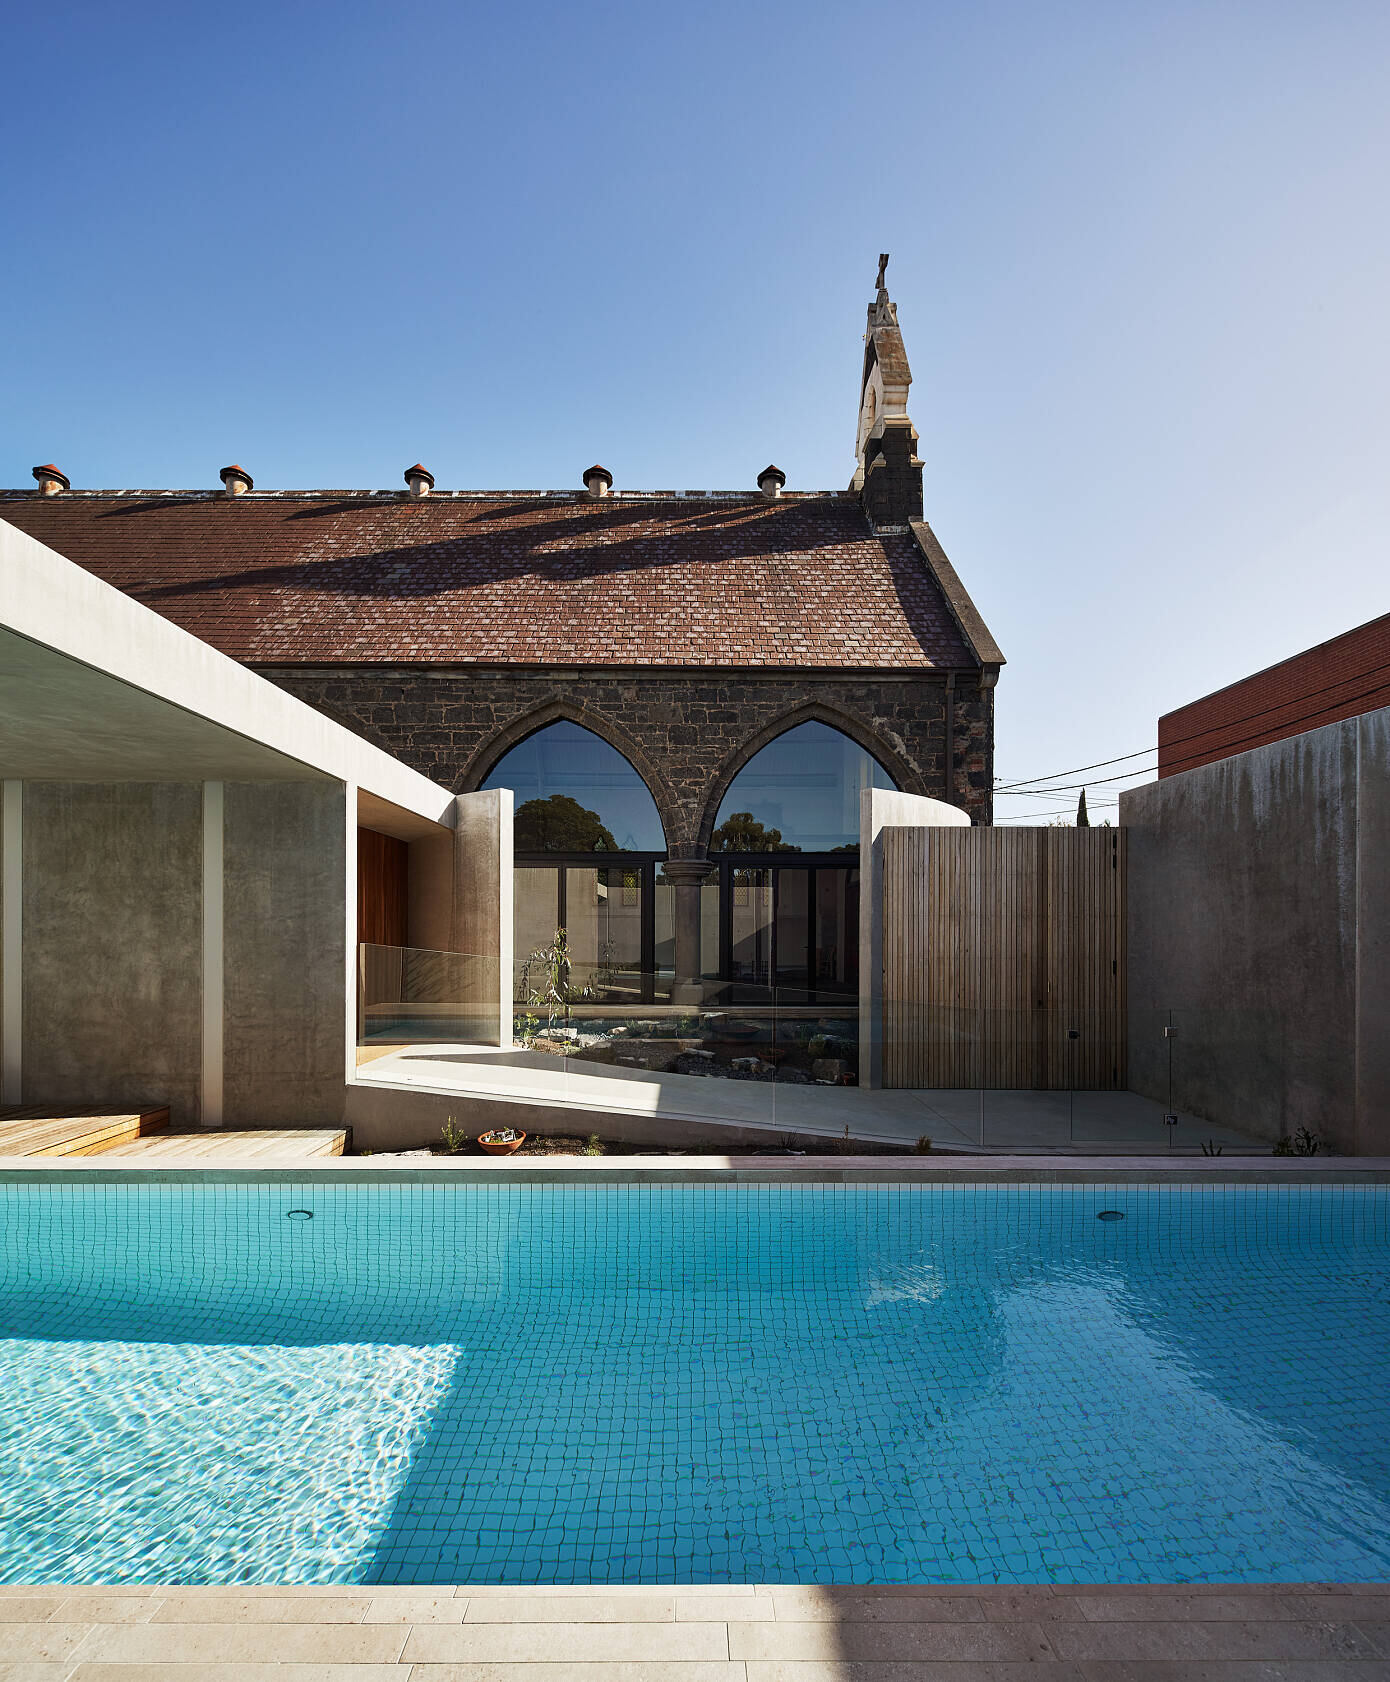 Courtyard House and Church by Kister Architects